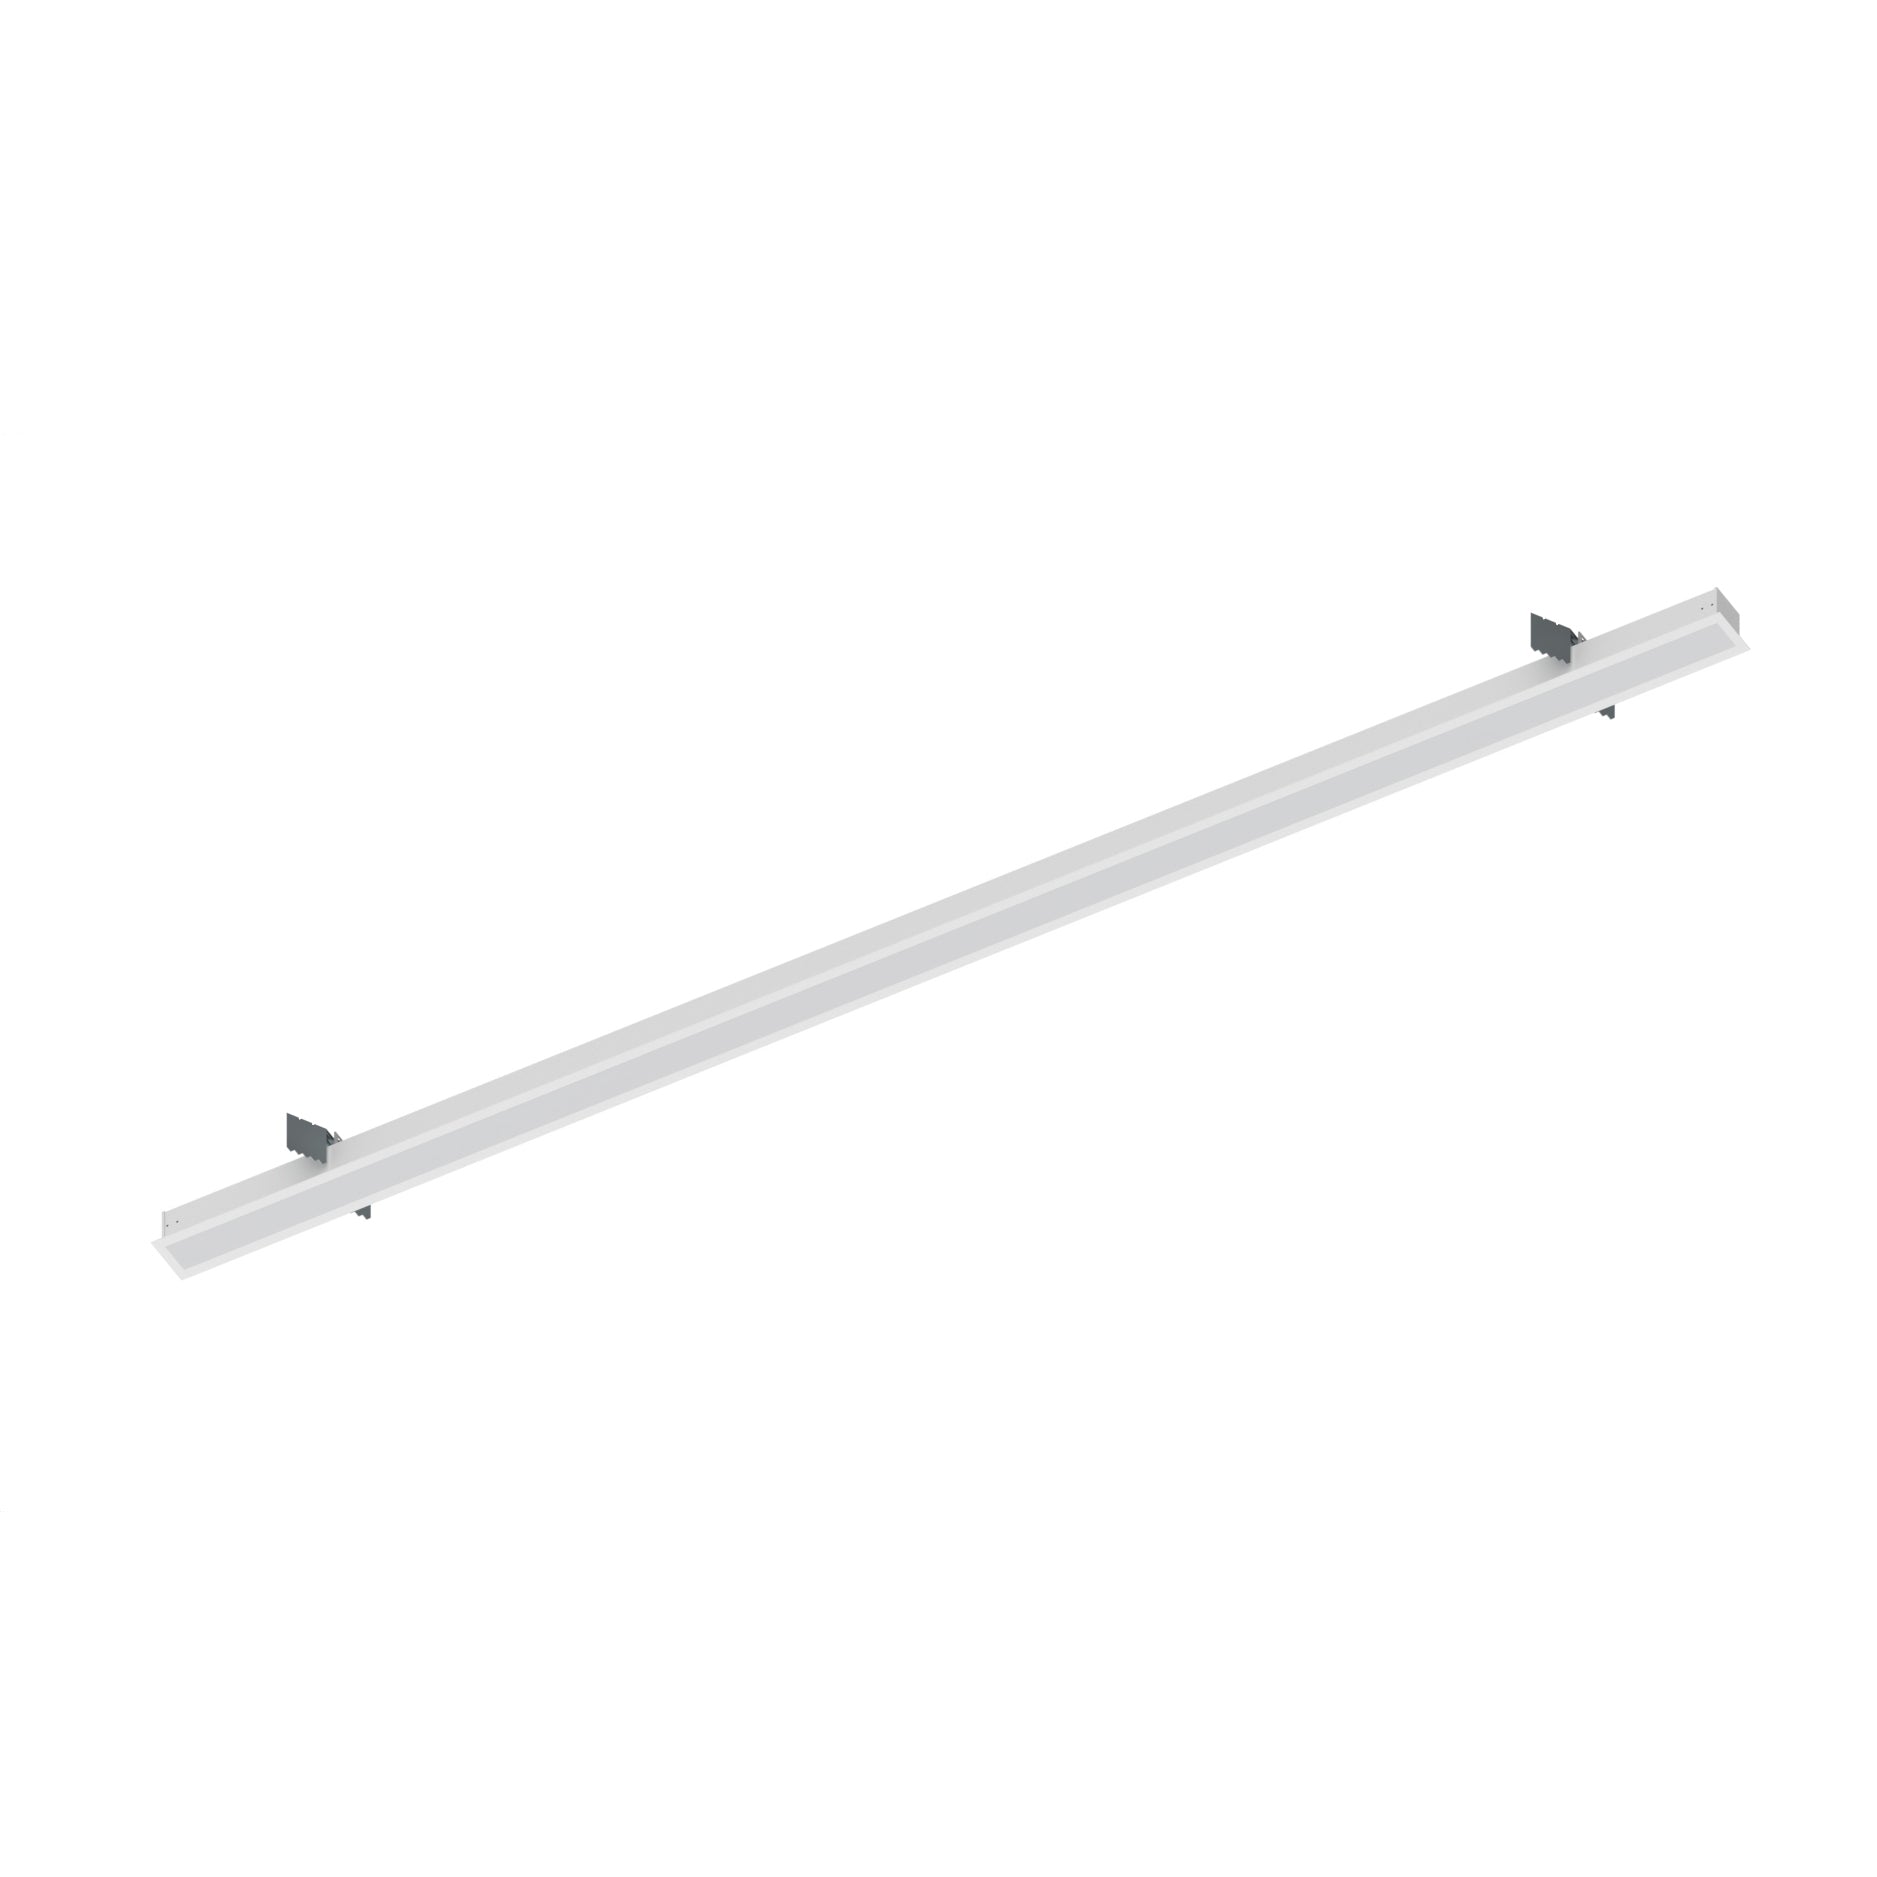 Nora Lighting NRLIN-81030W - Linear - 8' L-Line LED Recessed Linear, 8400lm / 3000K, White Finish